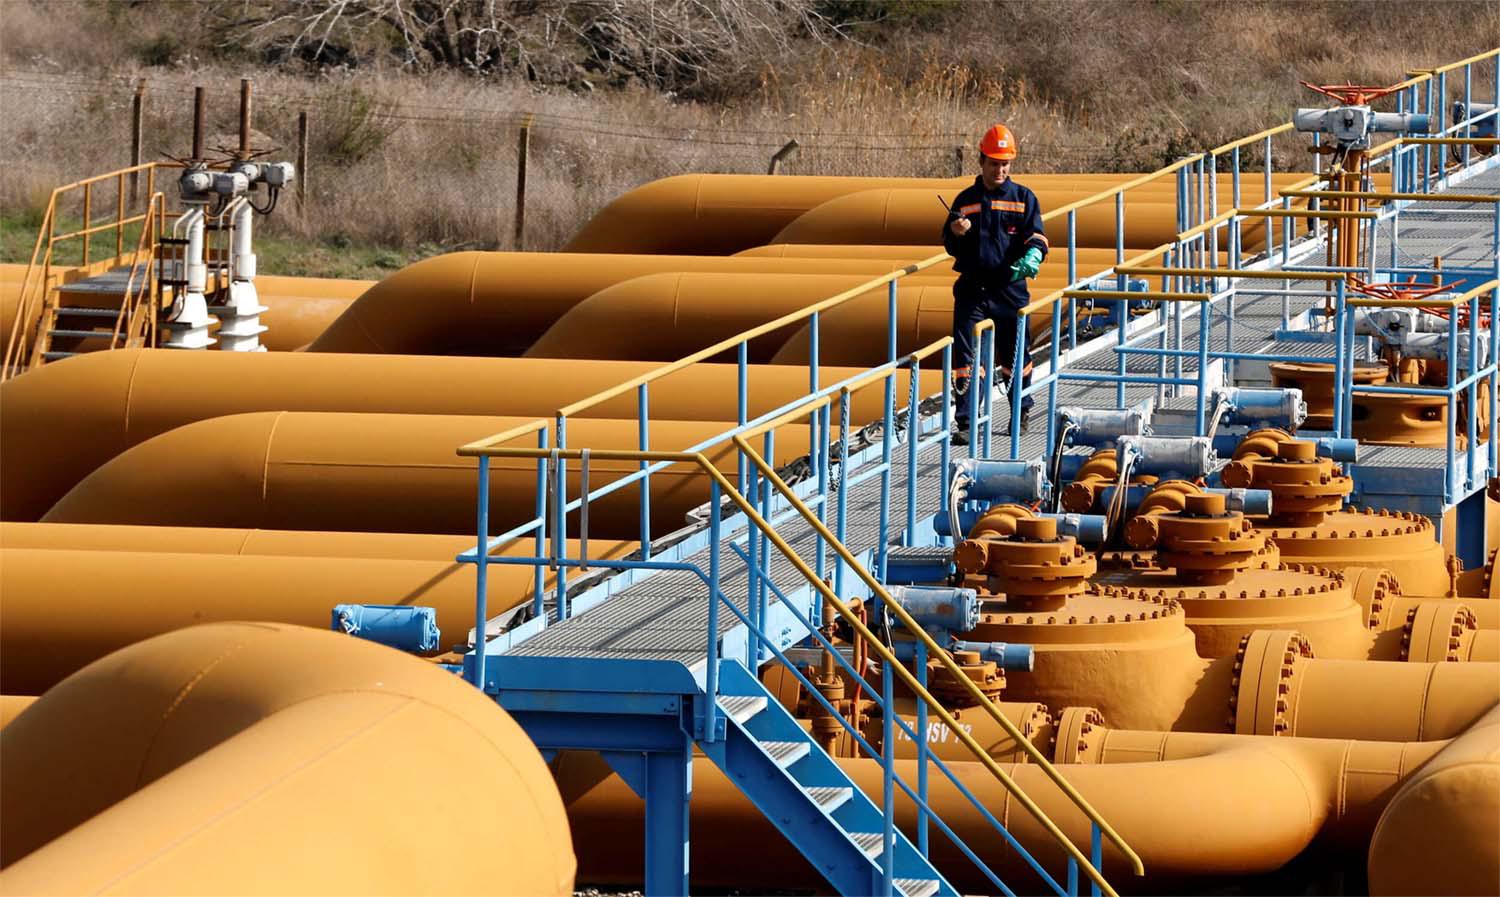 Turkey stopped pumping Iraqi crude from the pipeline